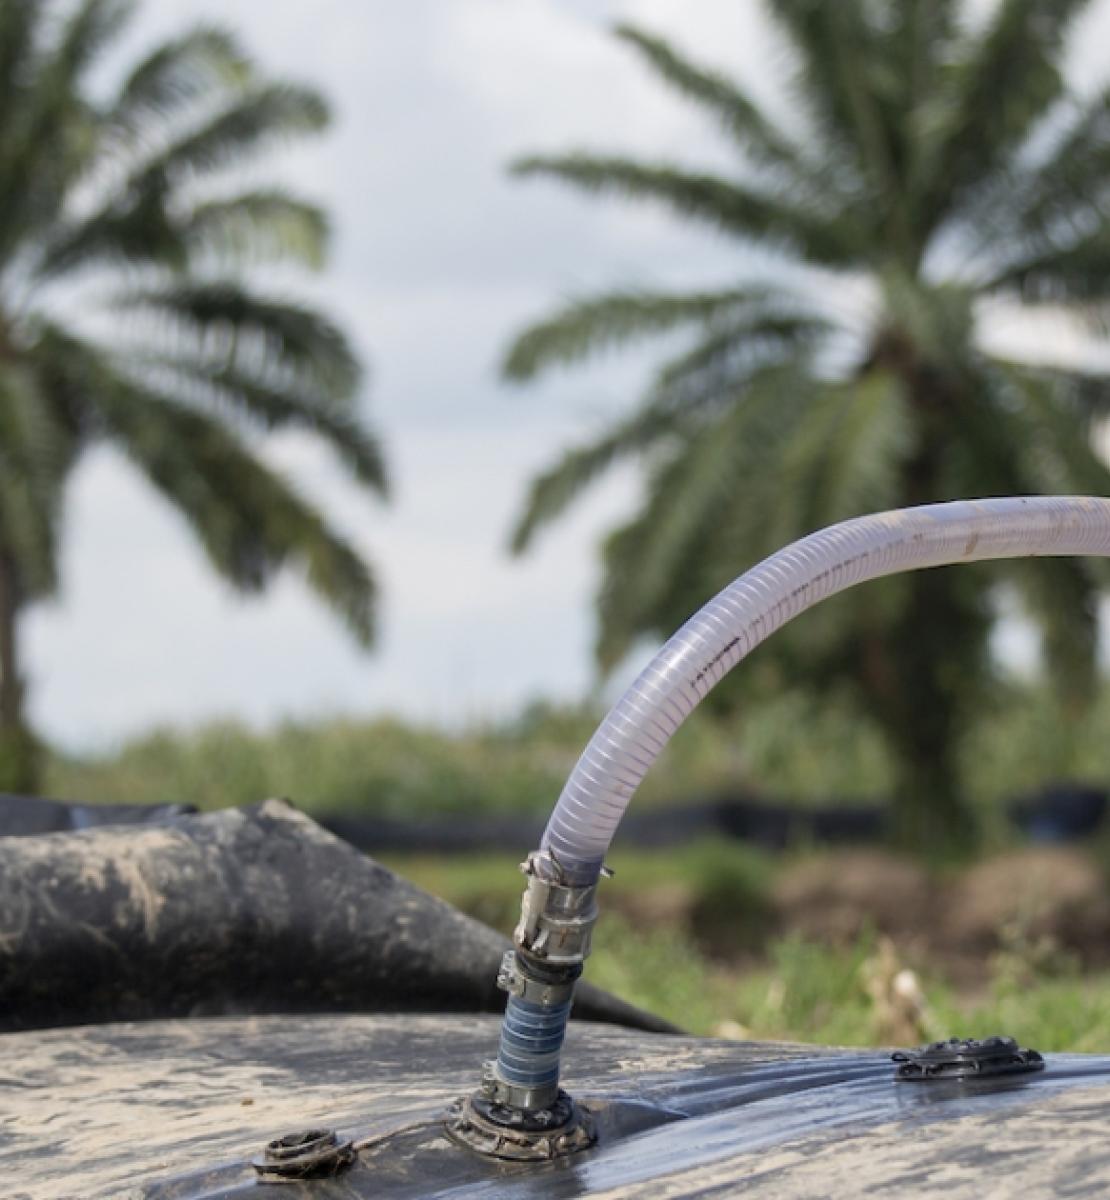 In Burundi, a young man wearing gray pants and a t-shirt without sleeves uses a hose to pump water from a portable dam set up near two palm trees.